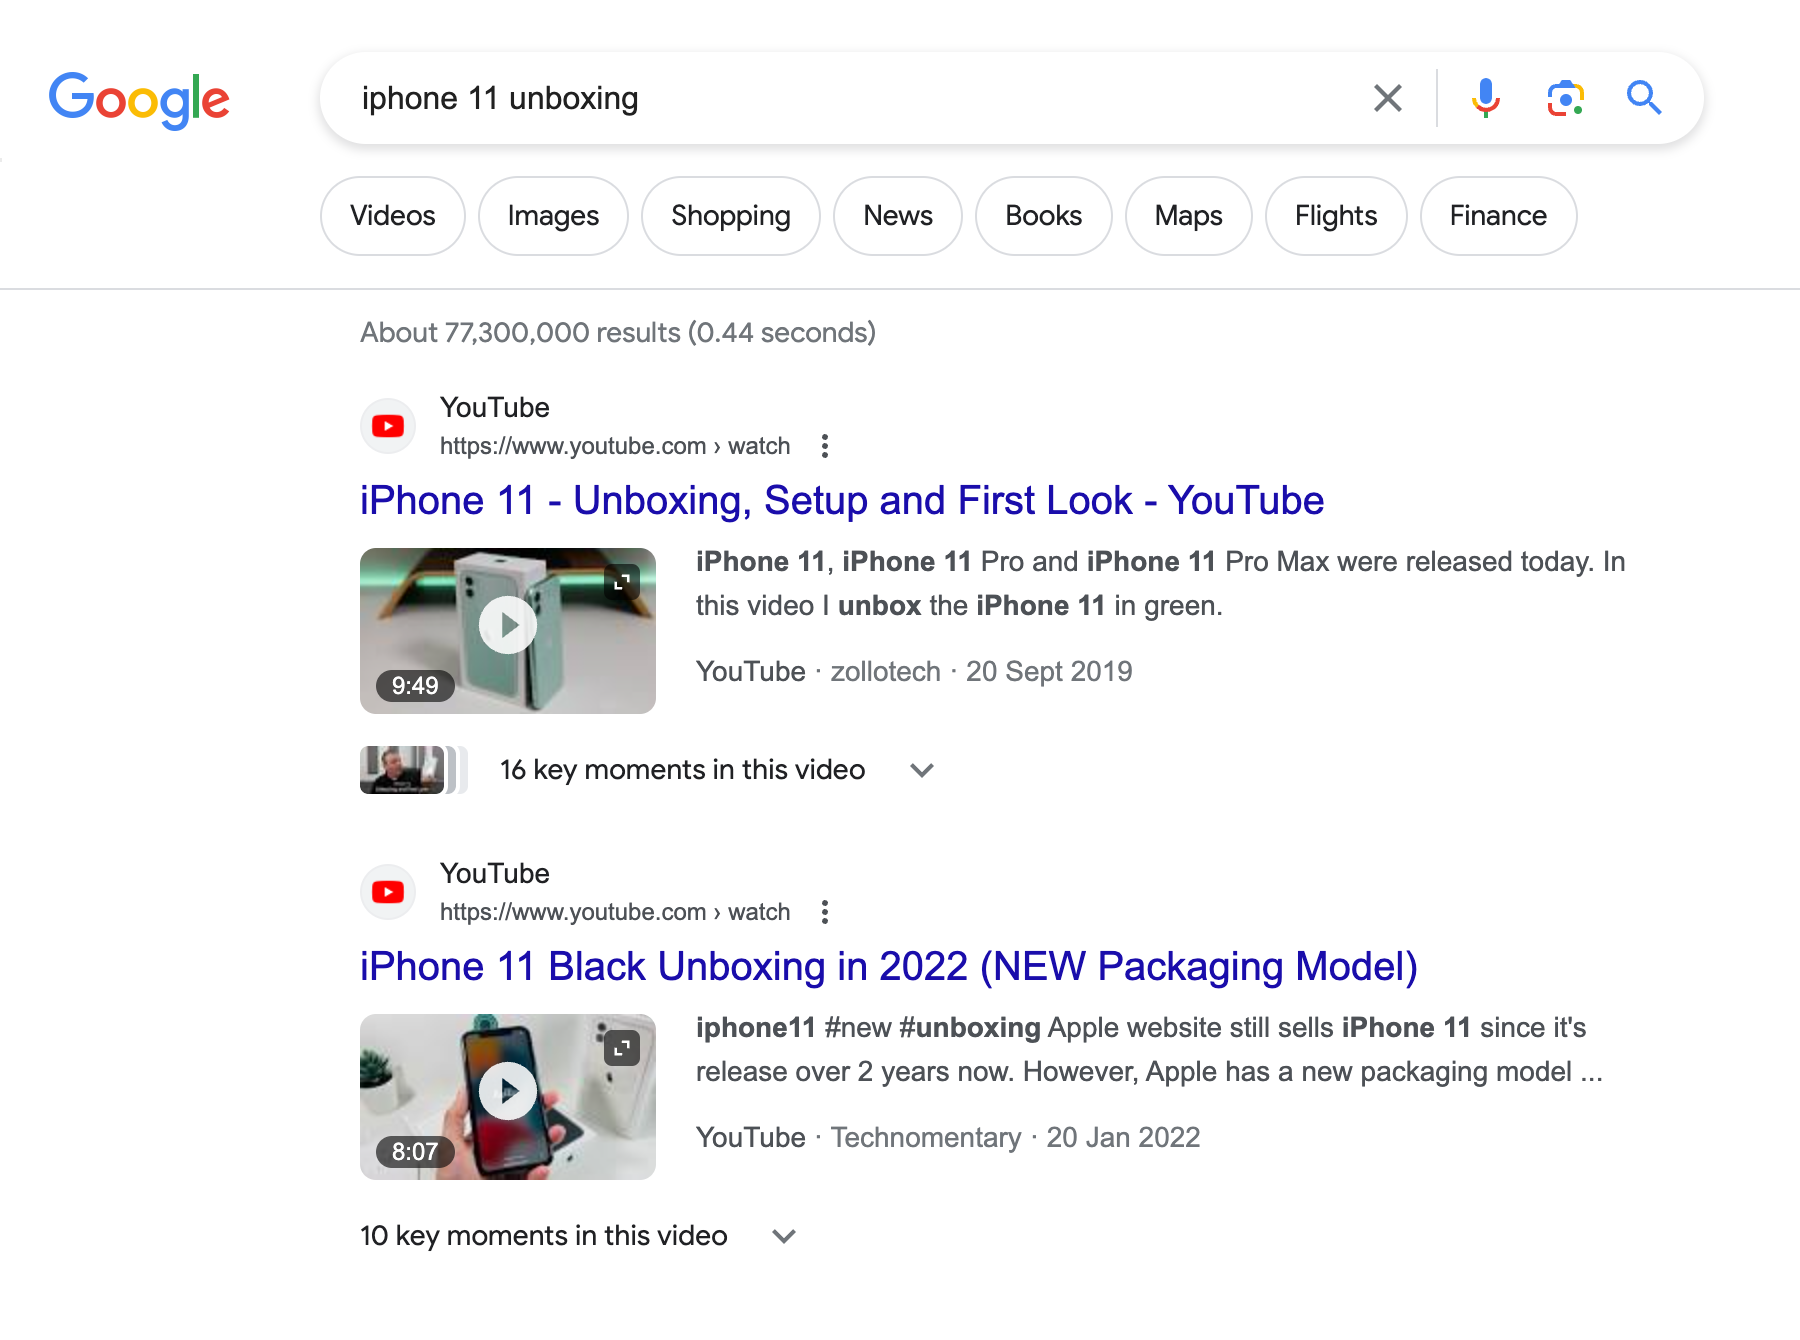 Search results page for the search query "iphone 11 unboxing". Two Featured Snippet boxes are displayed showing videos on YouTube.